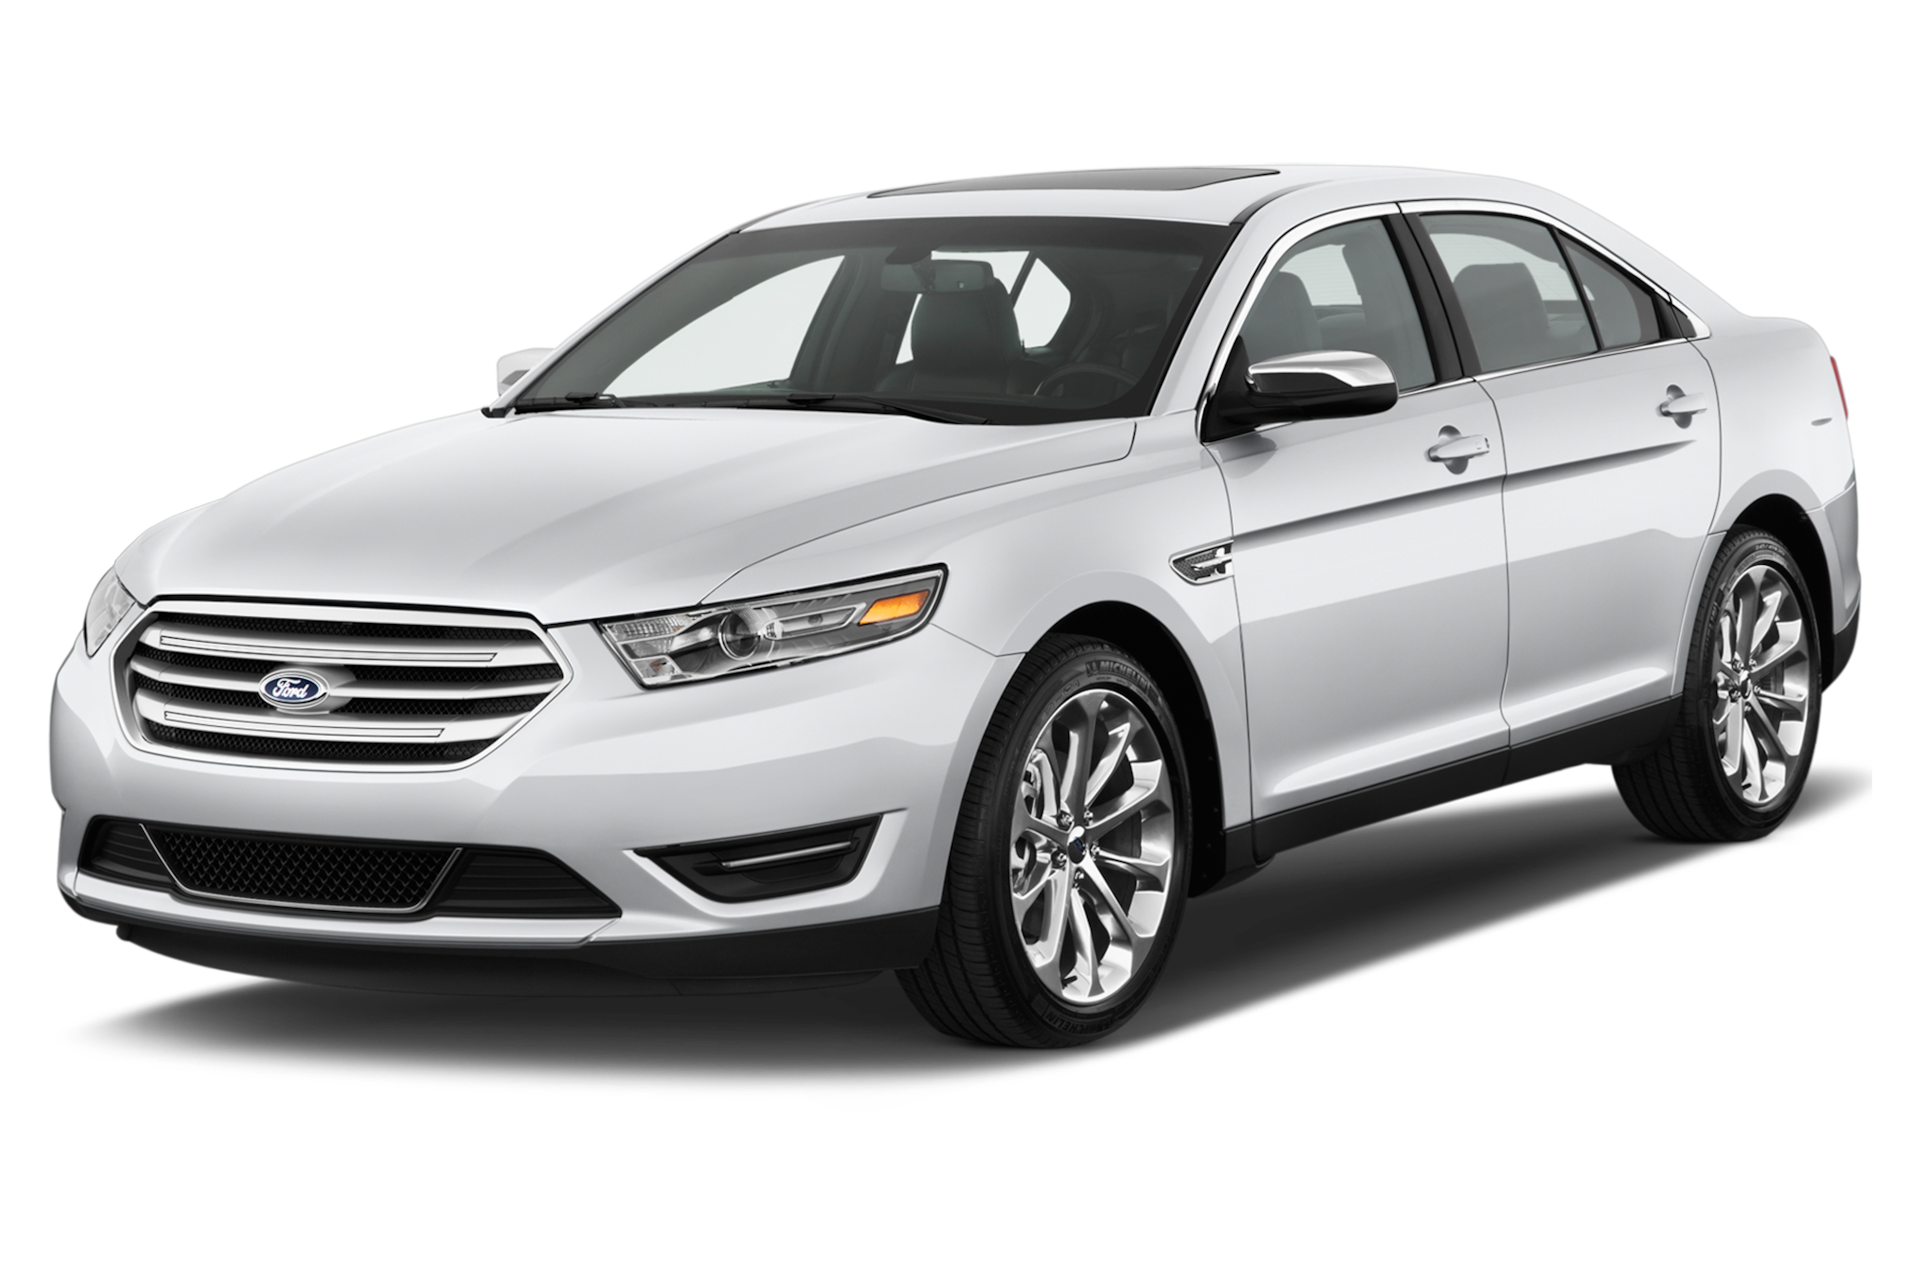 2013 Ford Taurus Prices, Reviews, and Photos - MotorTrend